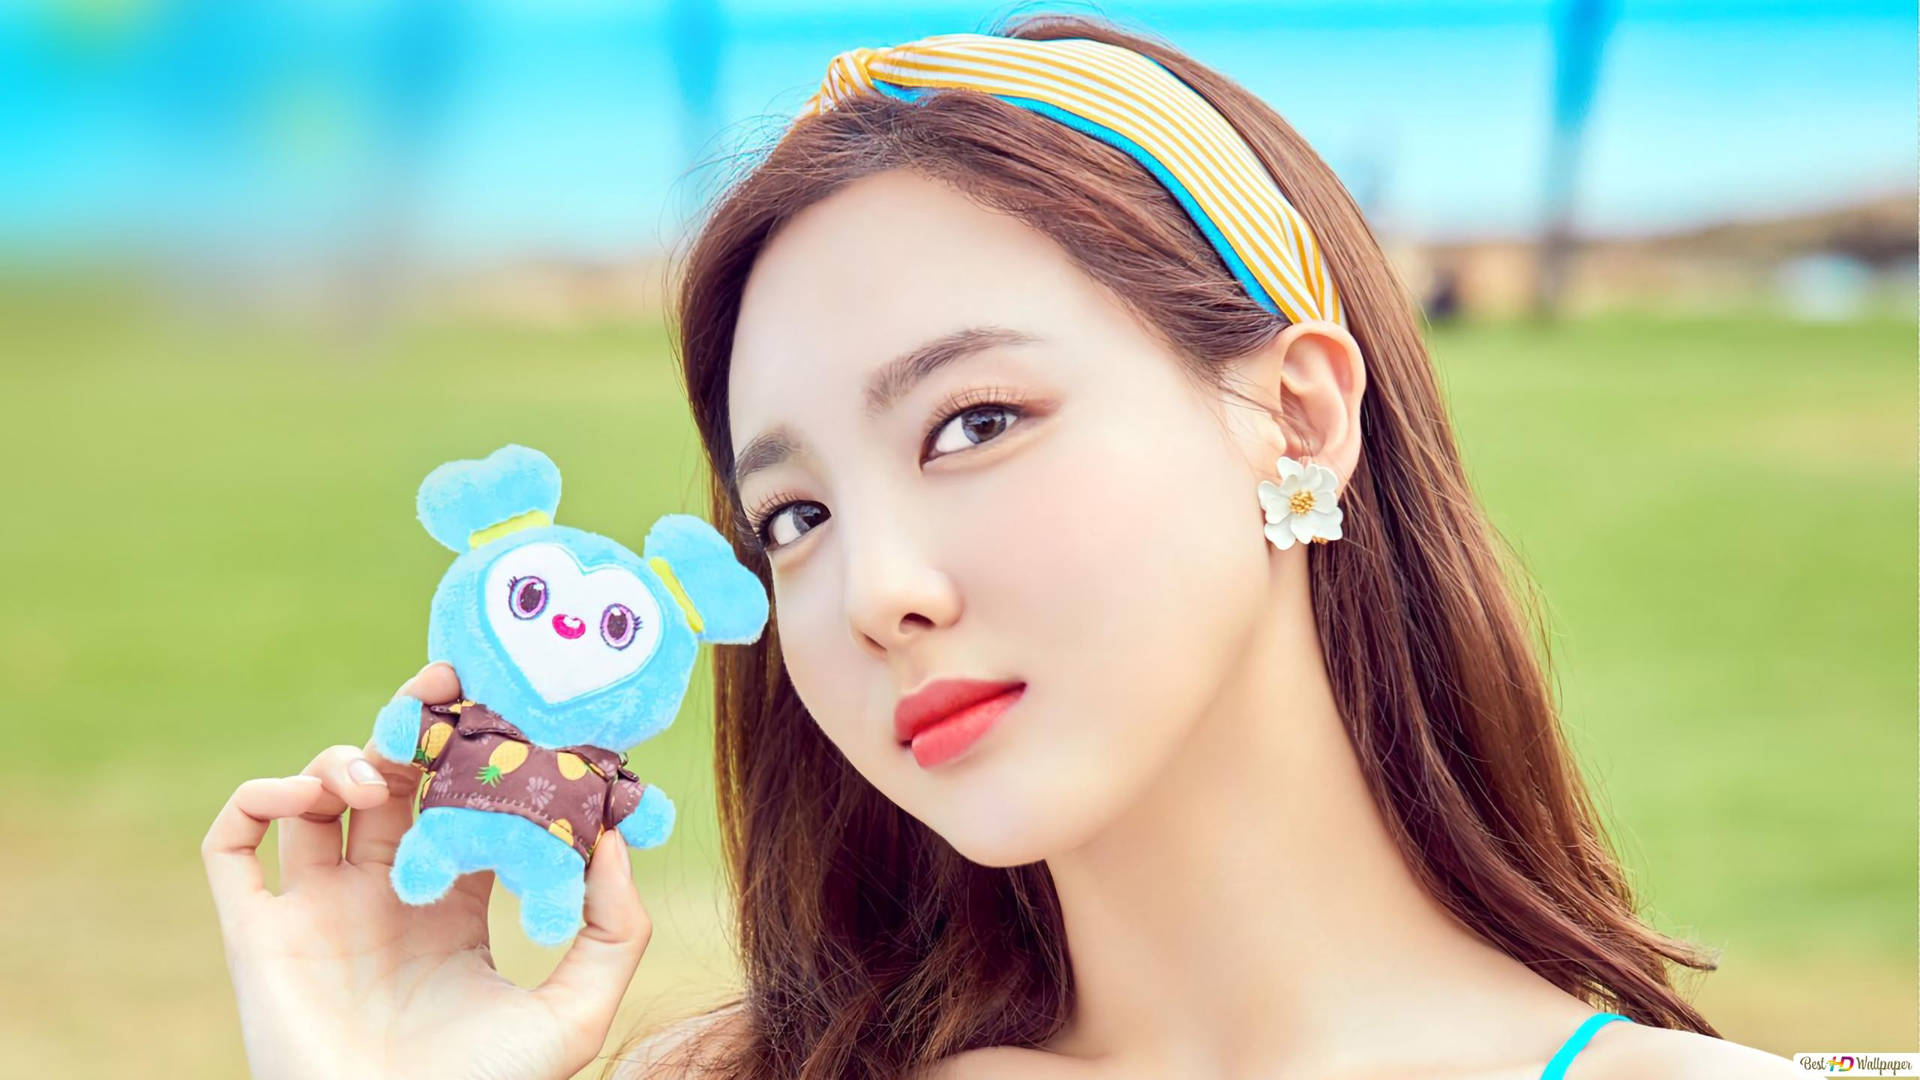 Twice Nayeon Holding A Stuff Toy Wallpaper